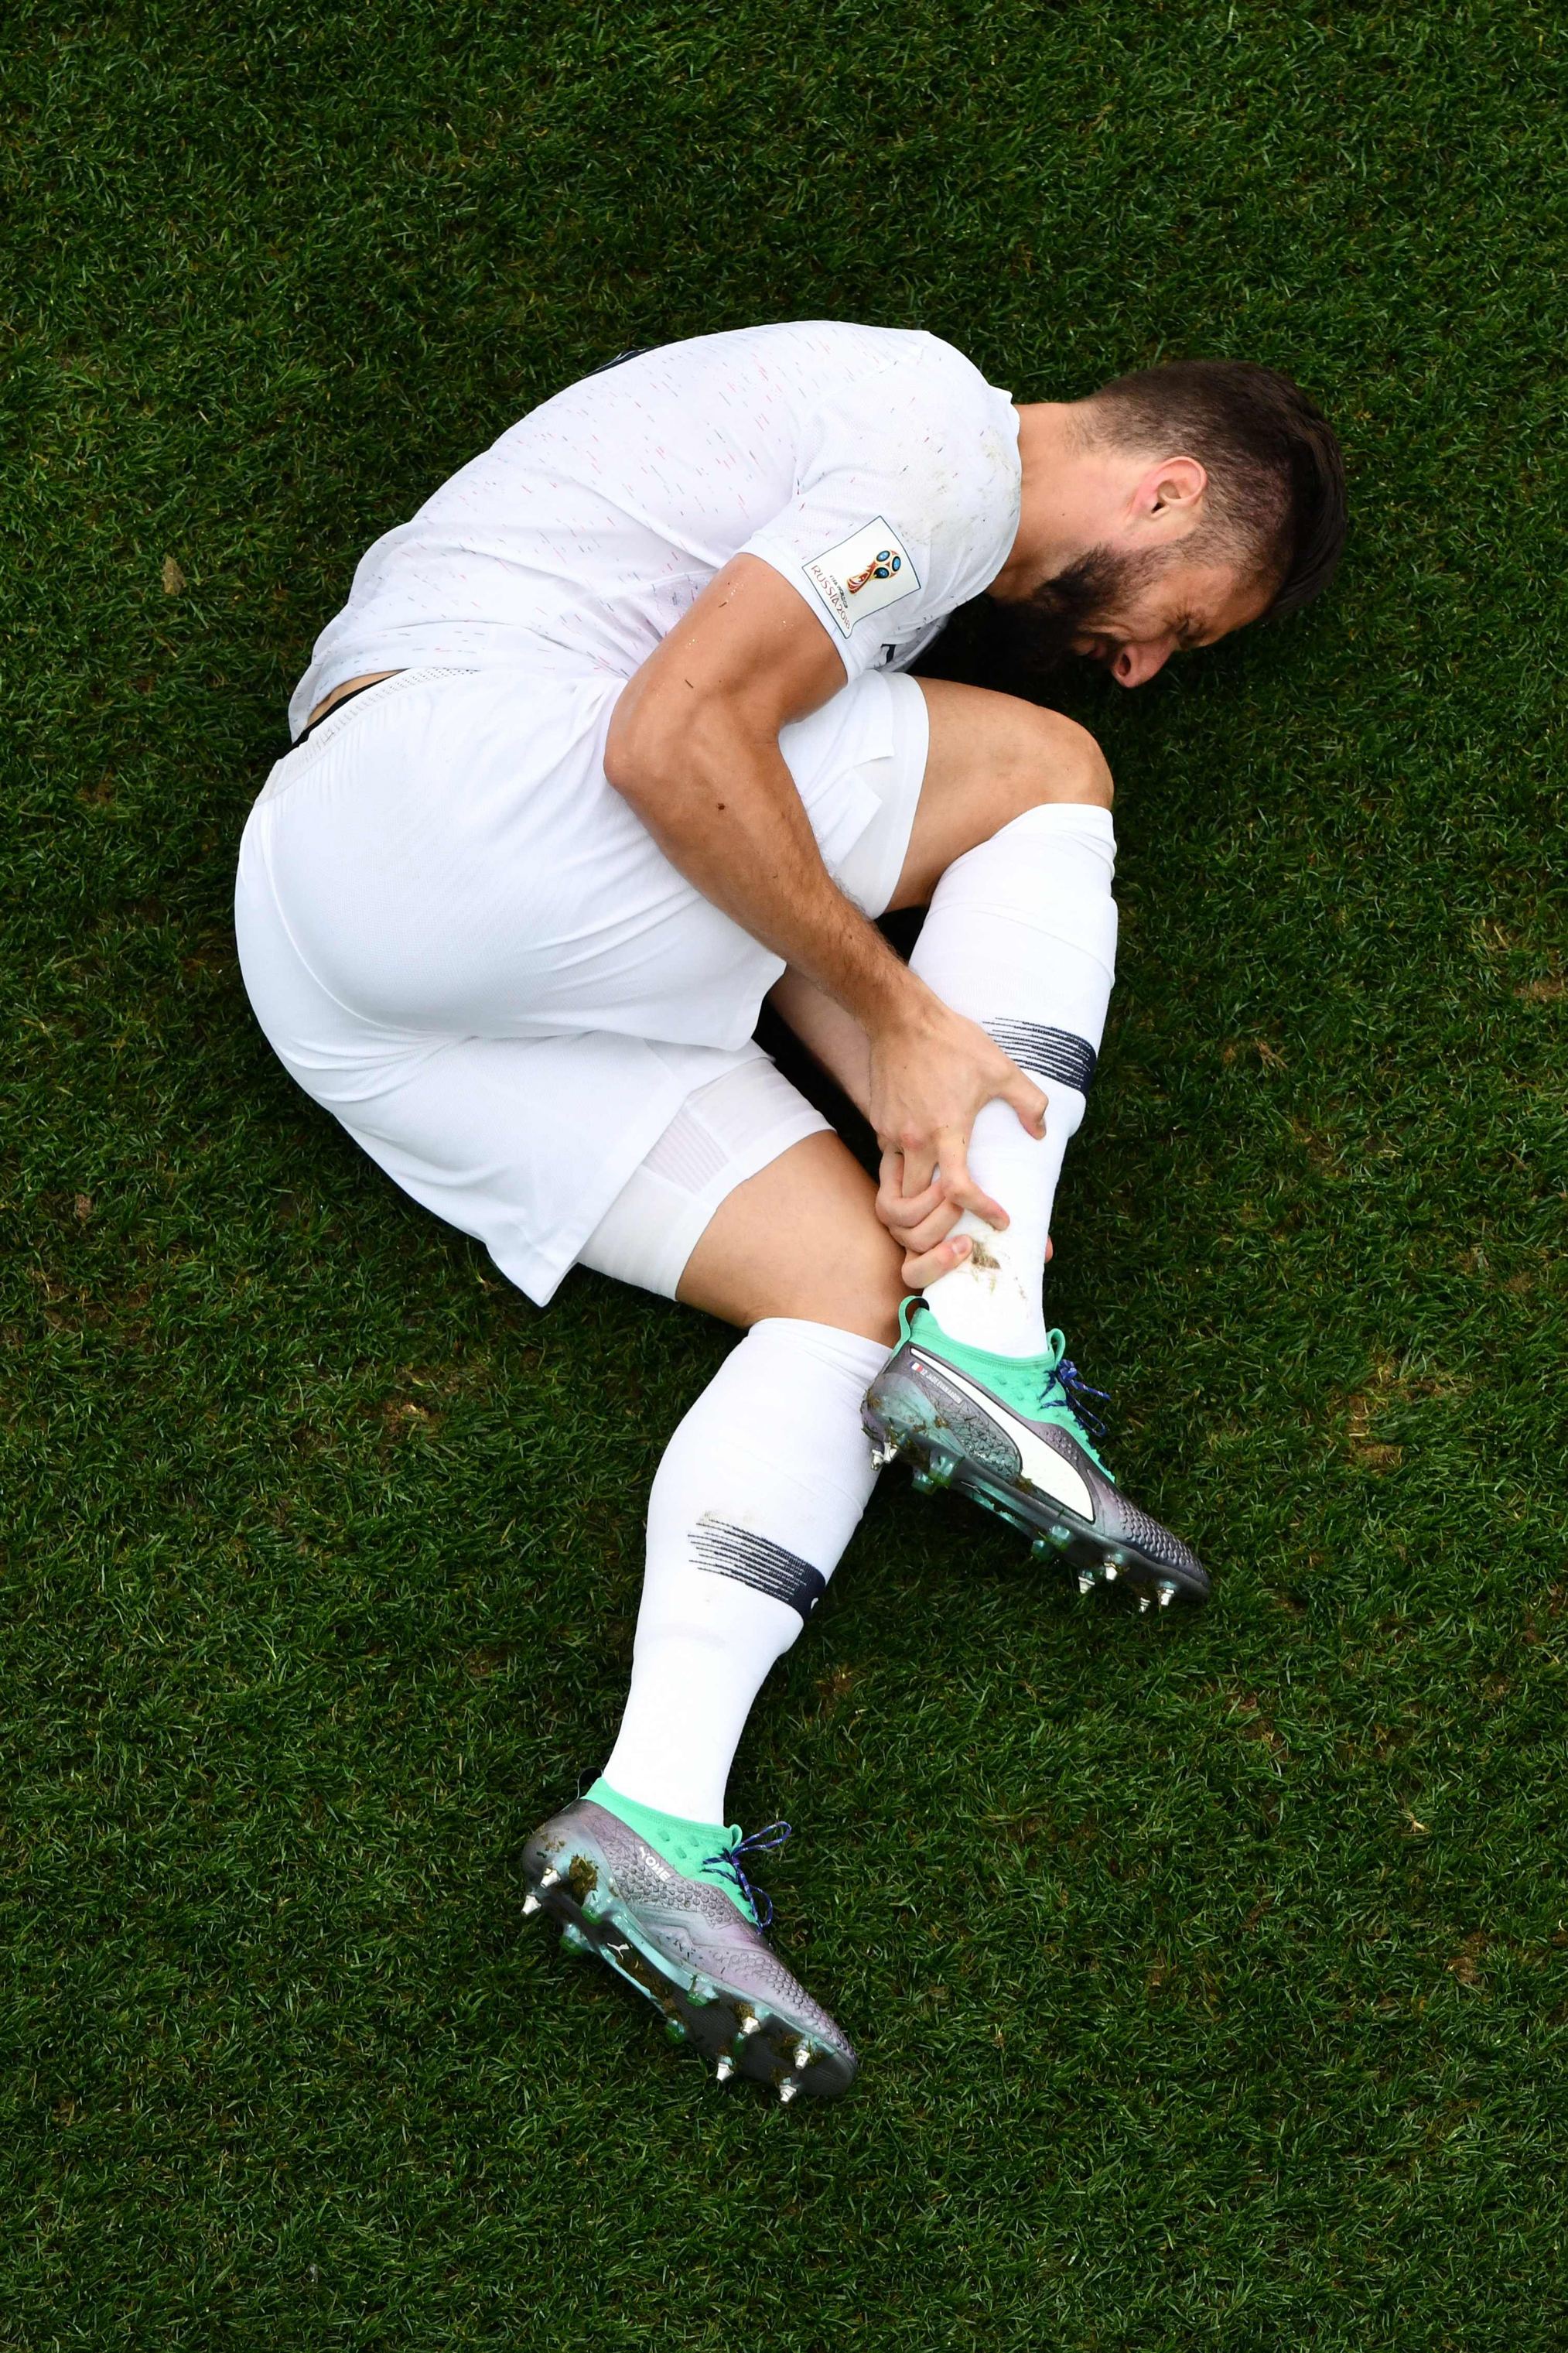 France's forward Olivier Giroud reacts after a challenge during the quarter-final football match between Uruguay and France on July 6, 2018. (Antonin Thulillier—AFP/Getty Images)